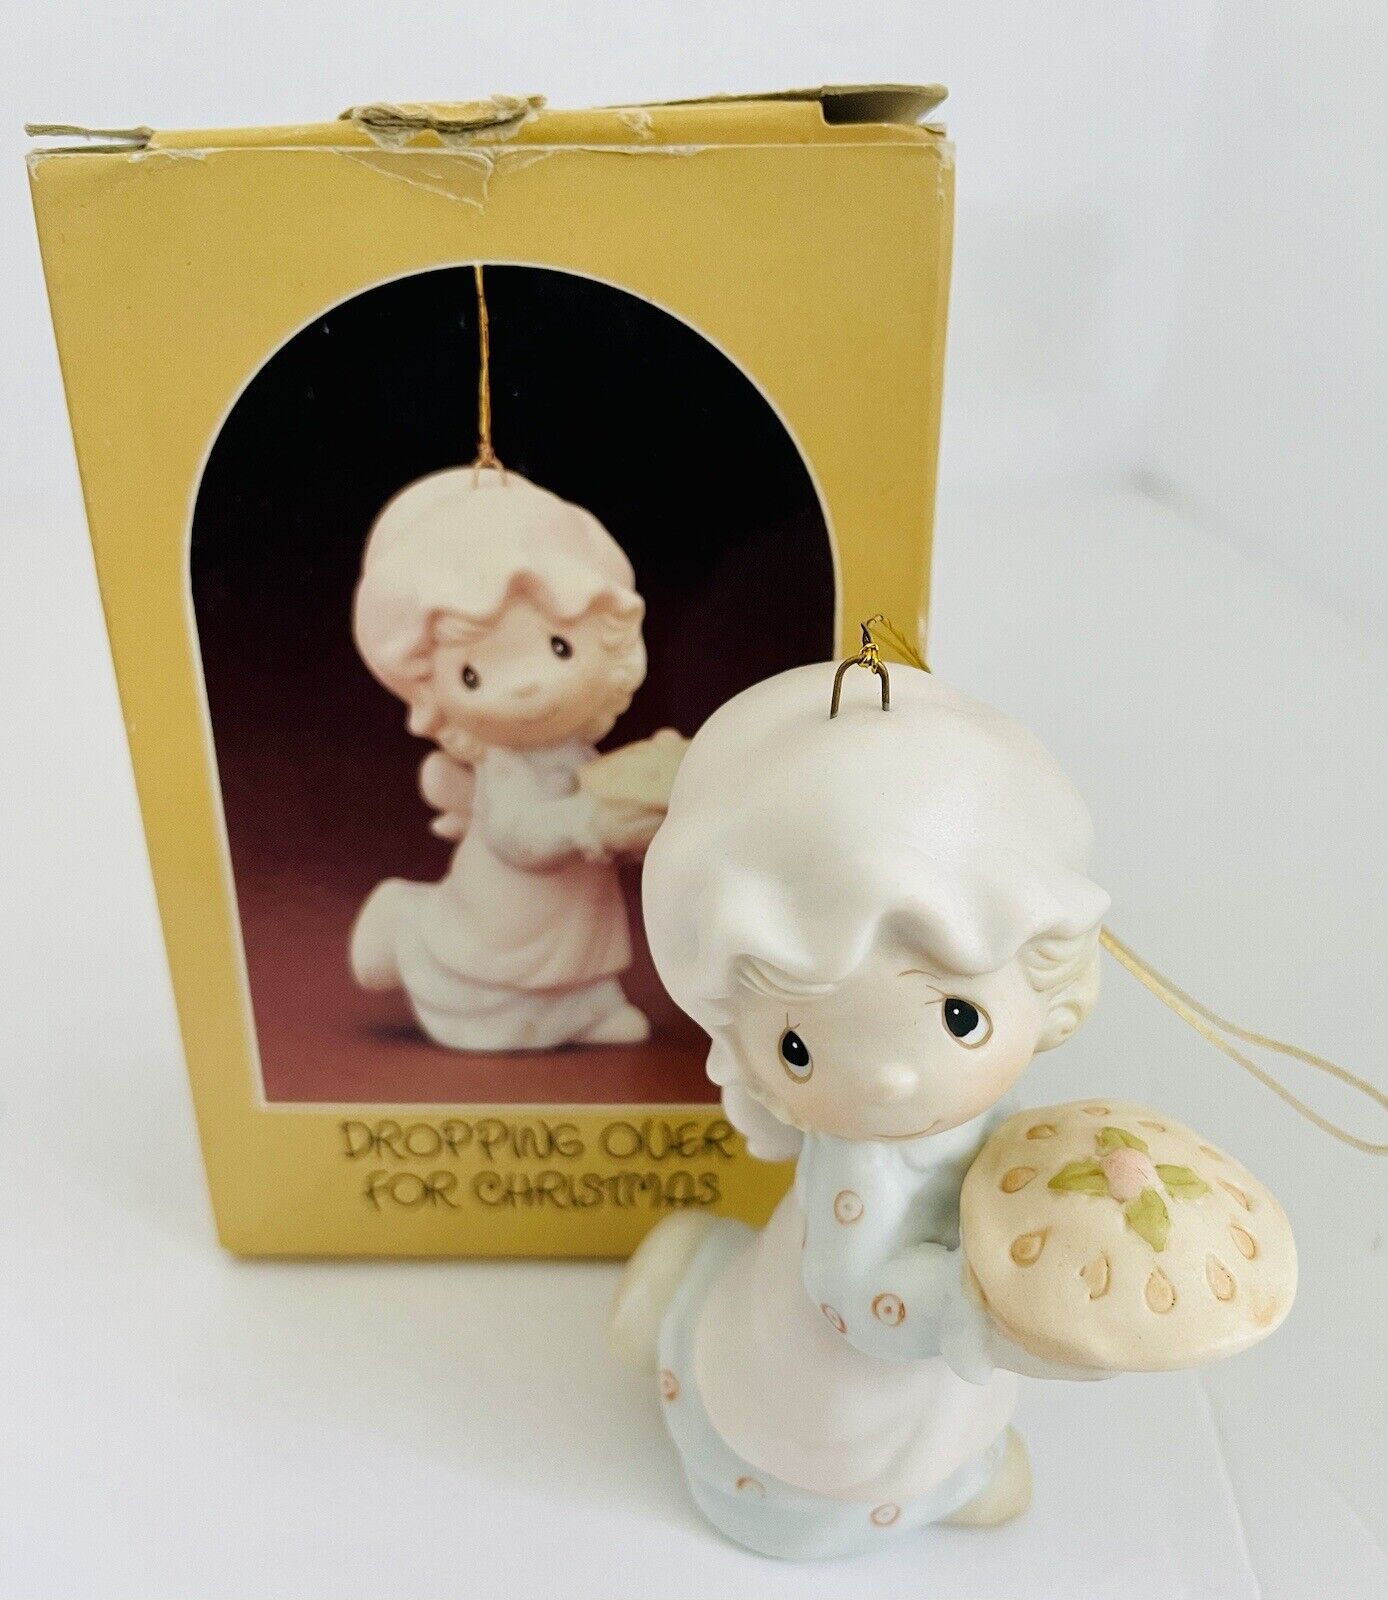 Vintage 1982 Precious Moments Ornament Dropping over for Christmas Enesco